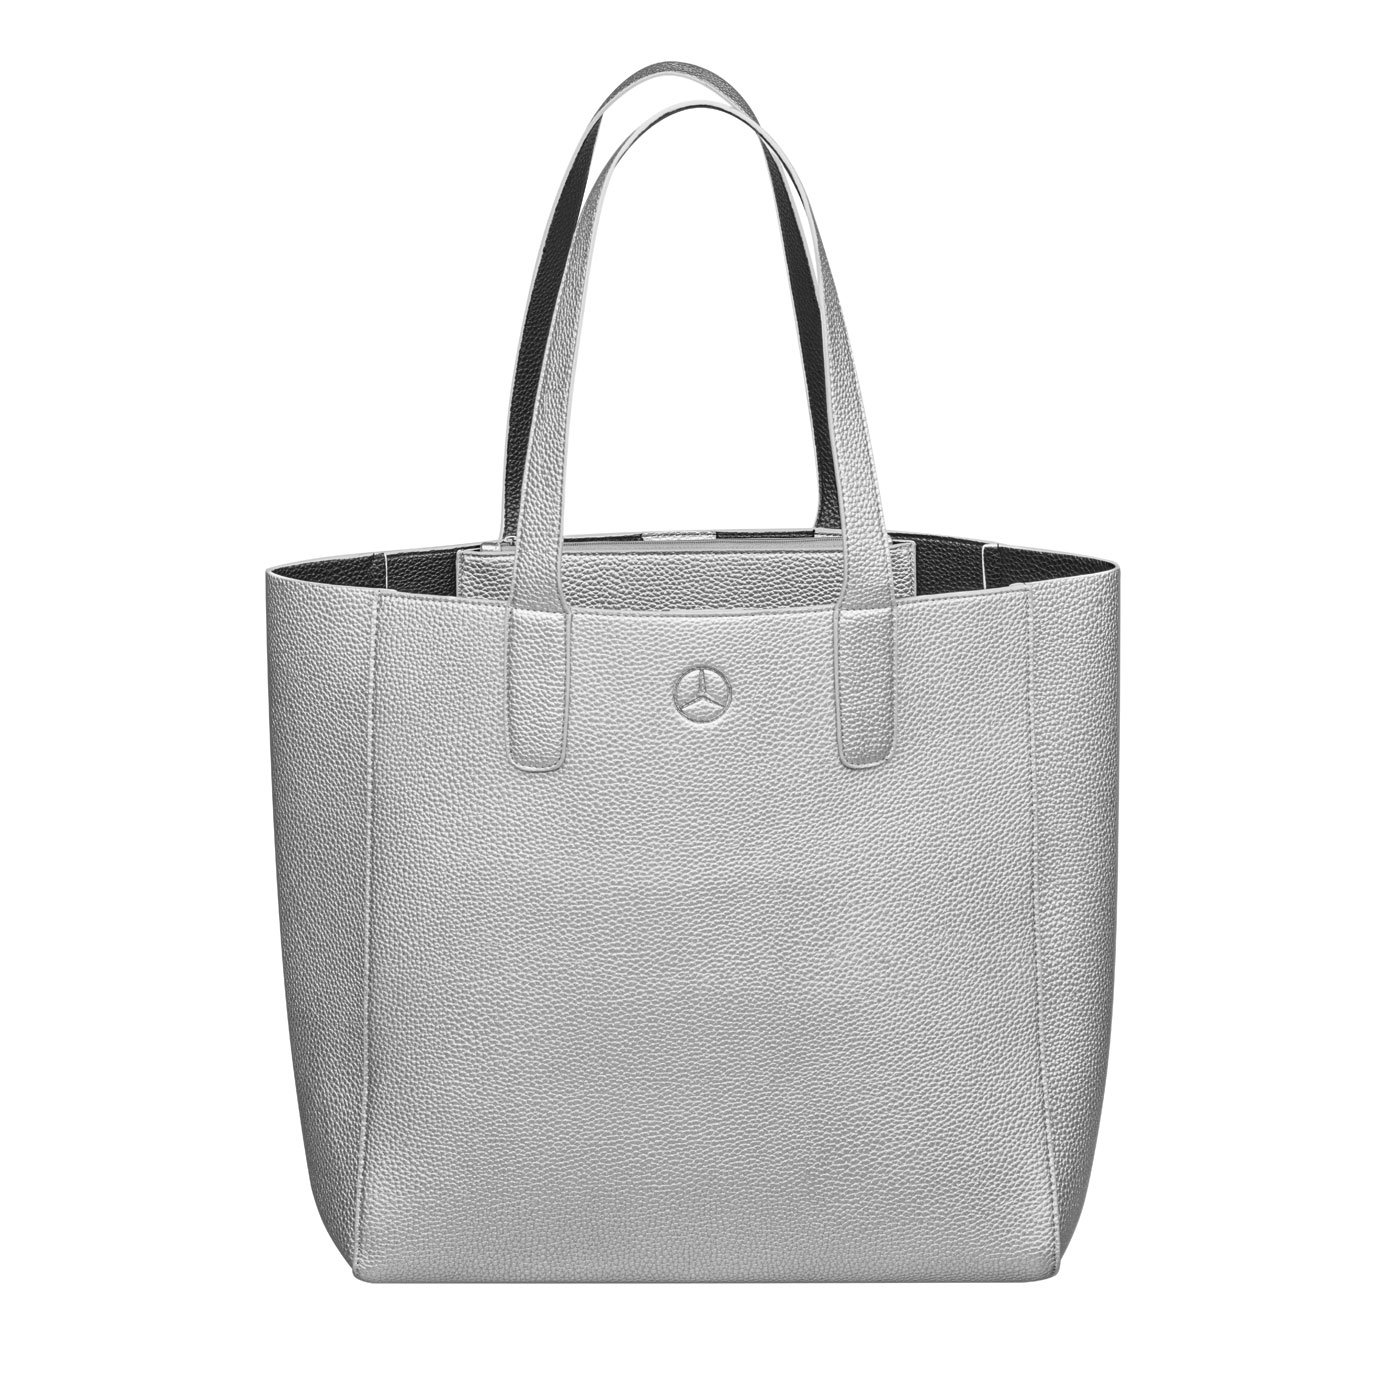 Glam Shopper Tote - BLUE  Mercedes-Benz Lifestyle Collection